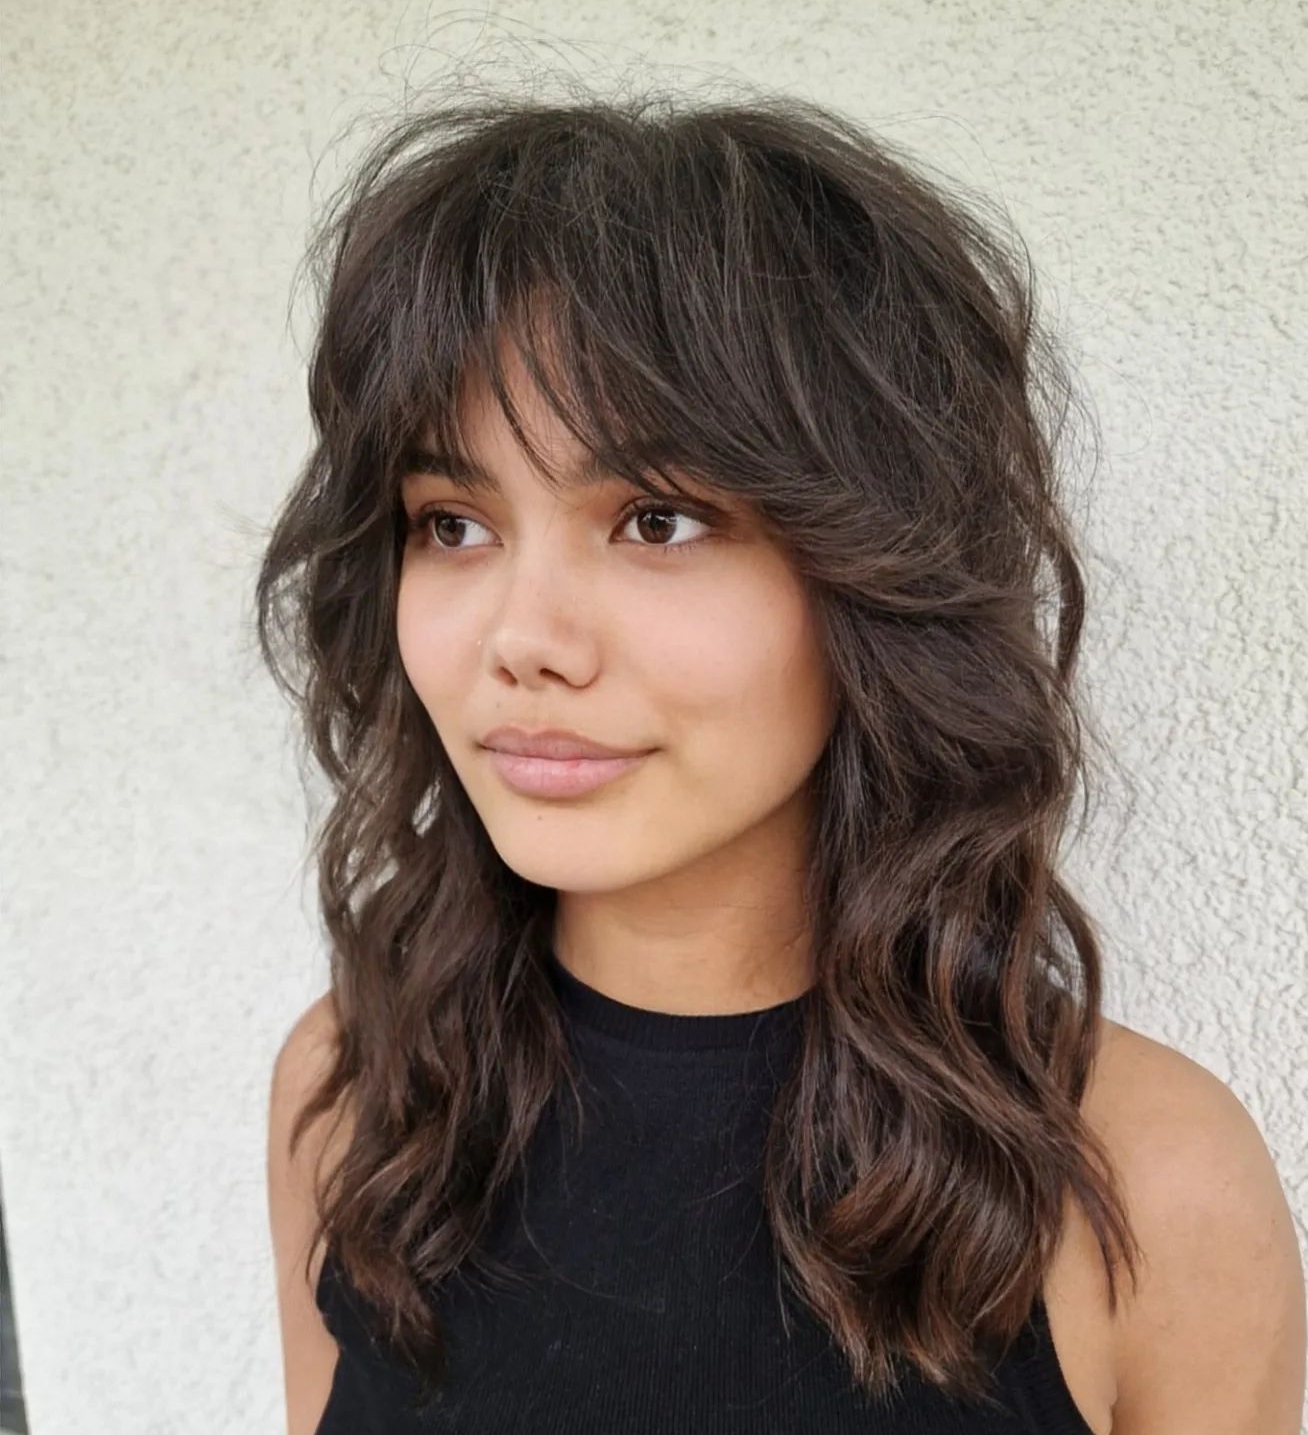 22 New Dramatic Wolf Cut Ideas and Styling Guide - Hairstyle